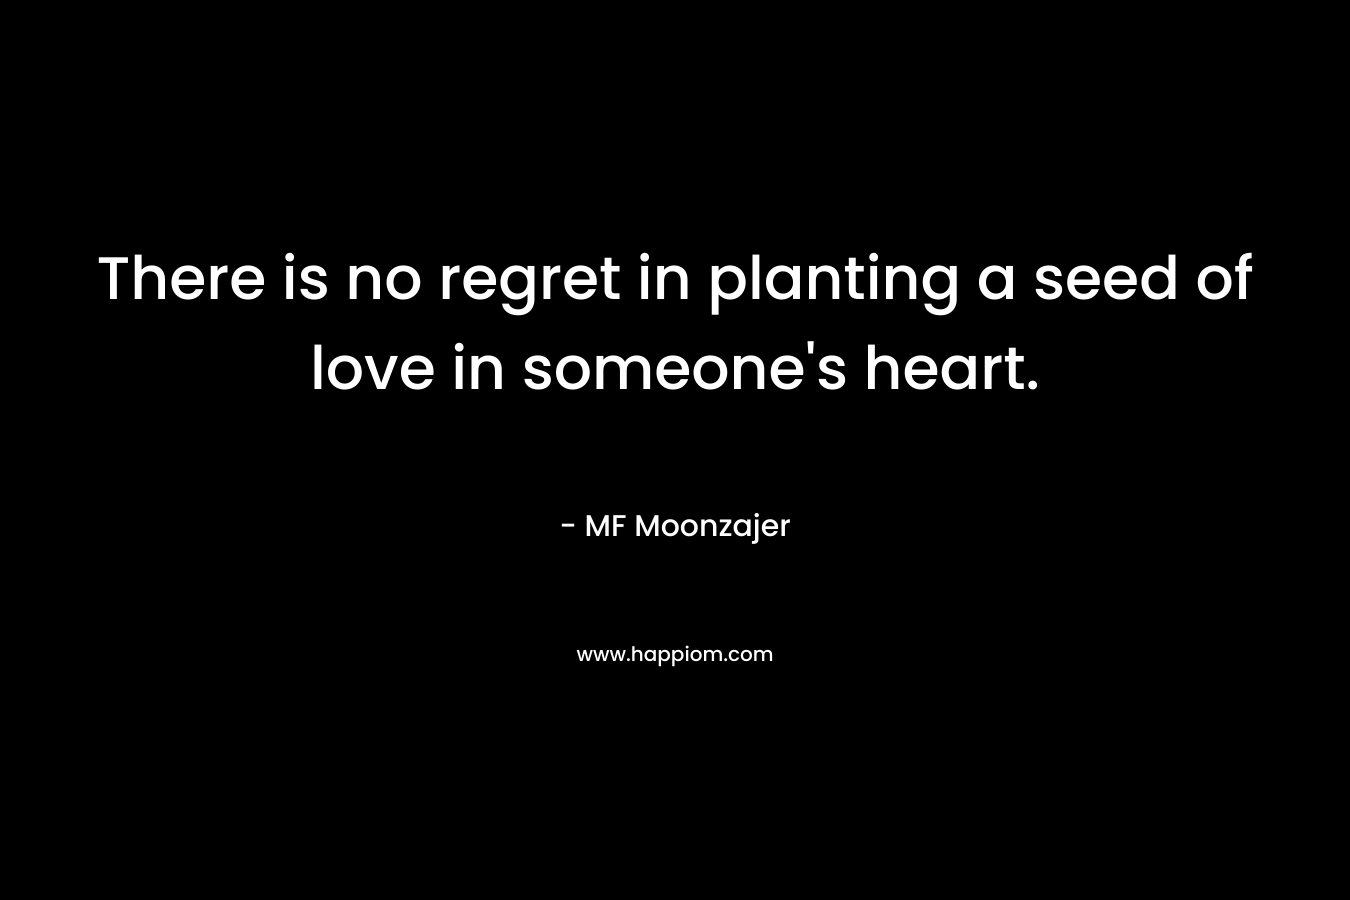 There is no regret in planting a seed of love in someone’s heart. – MF Moonzajer